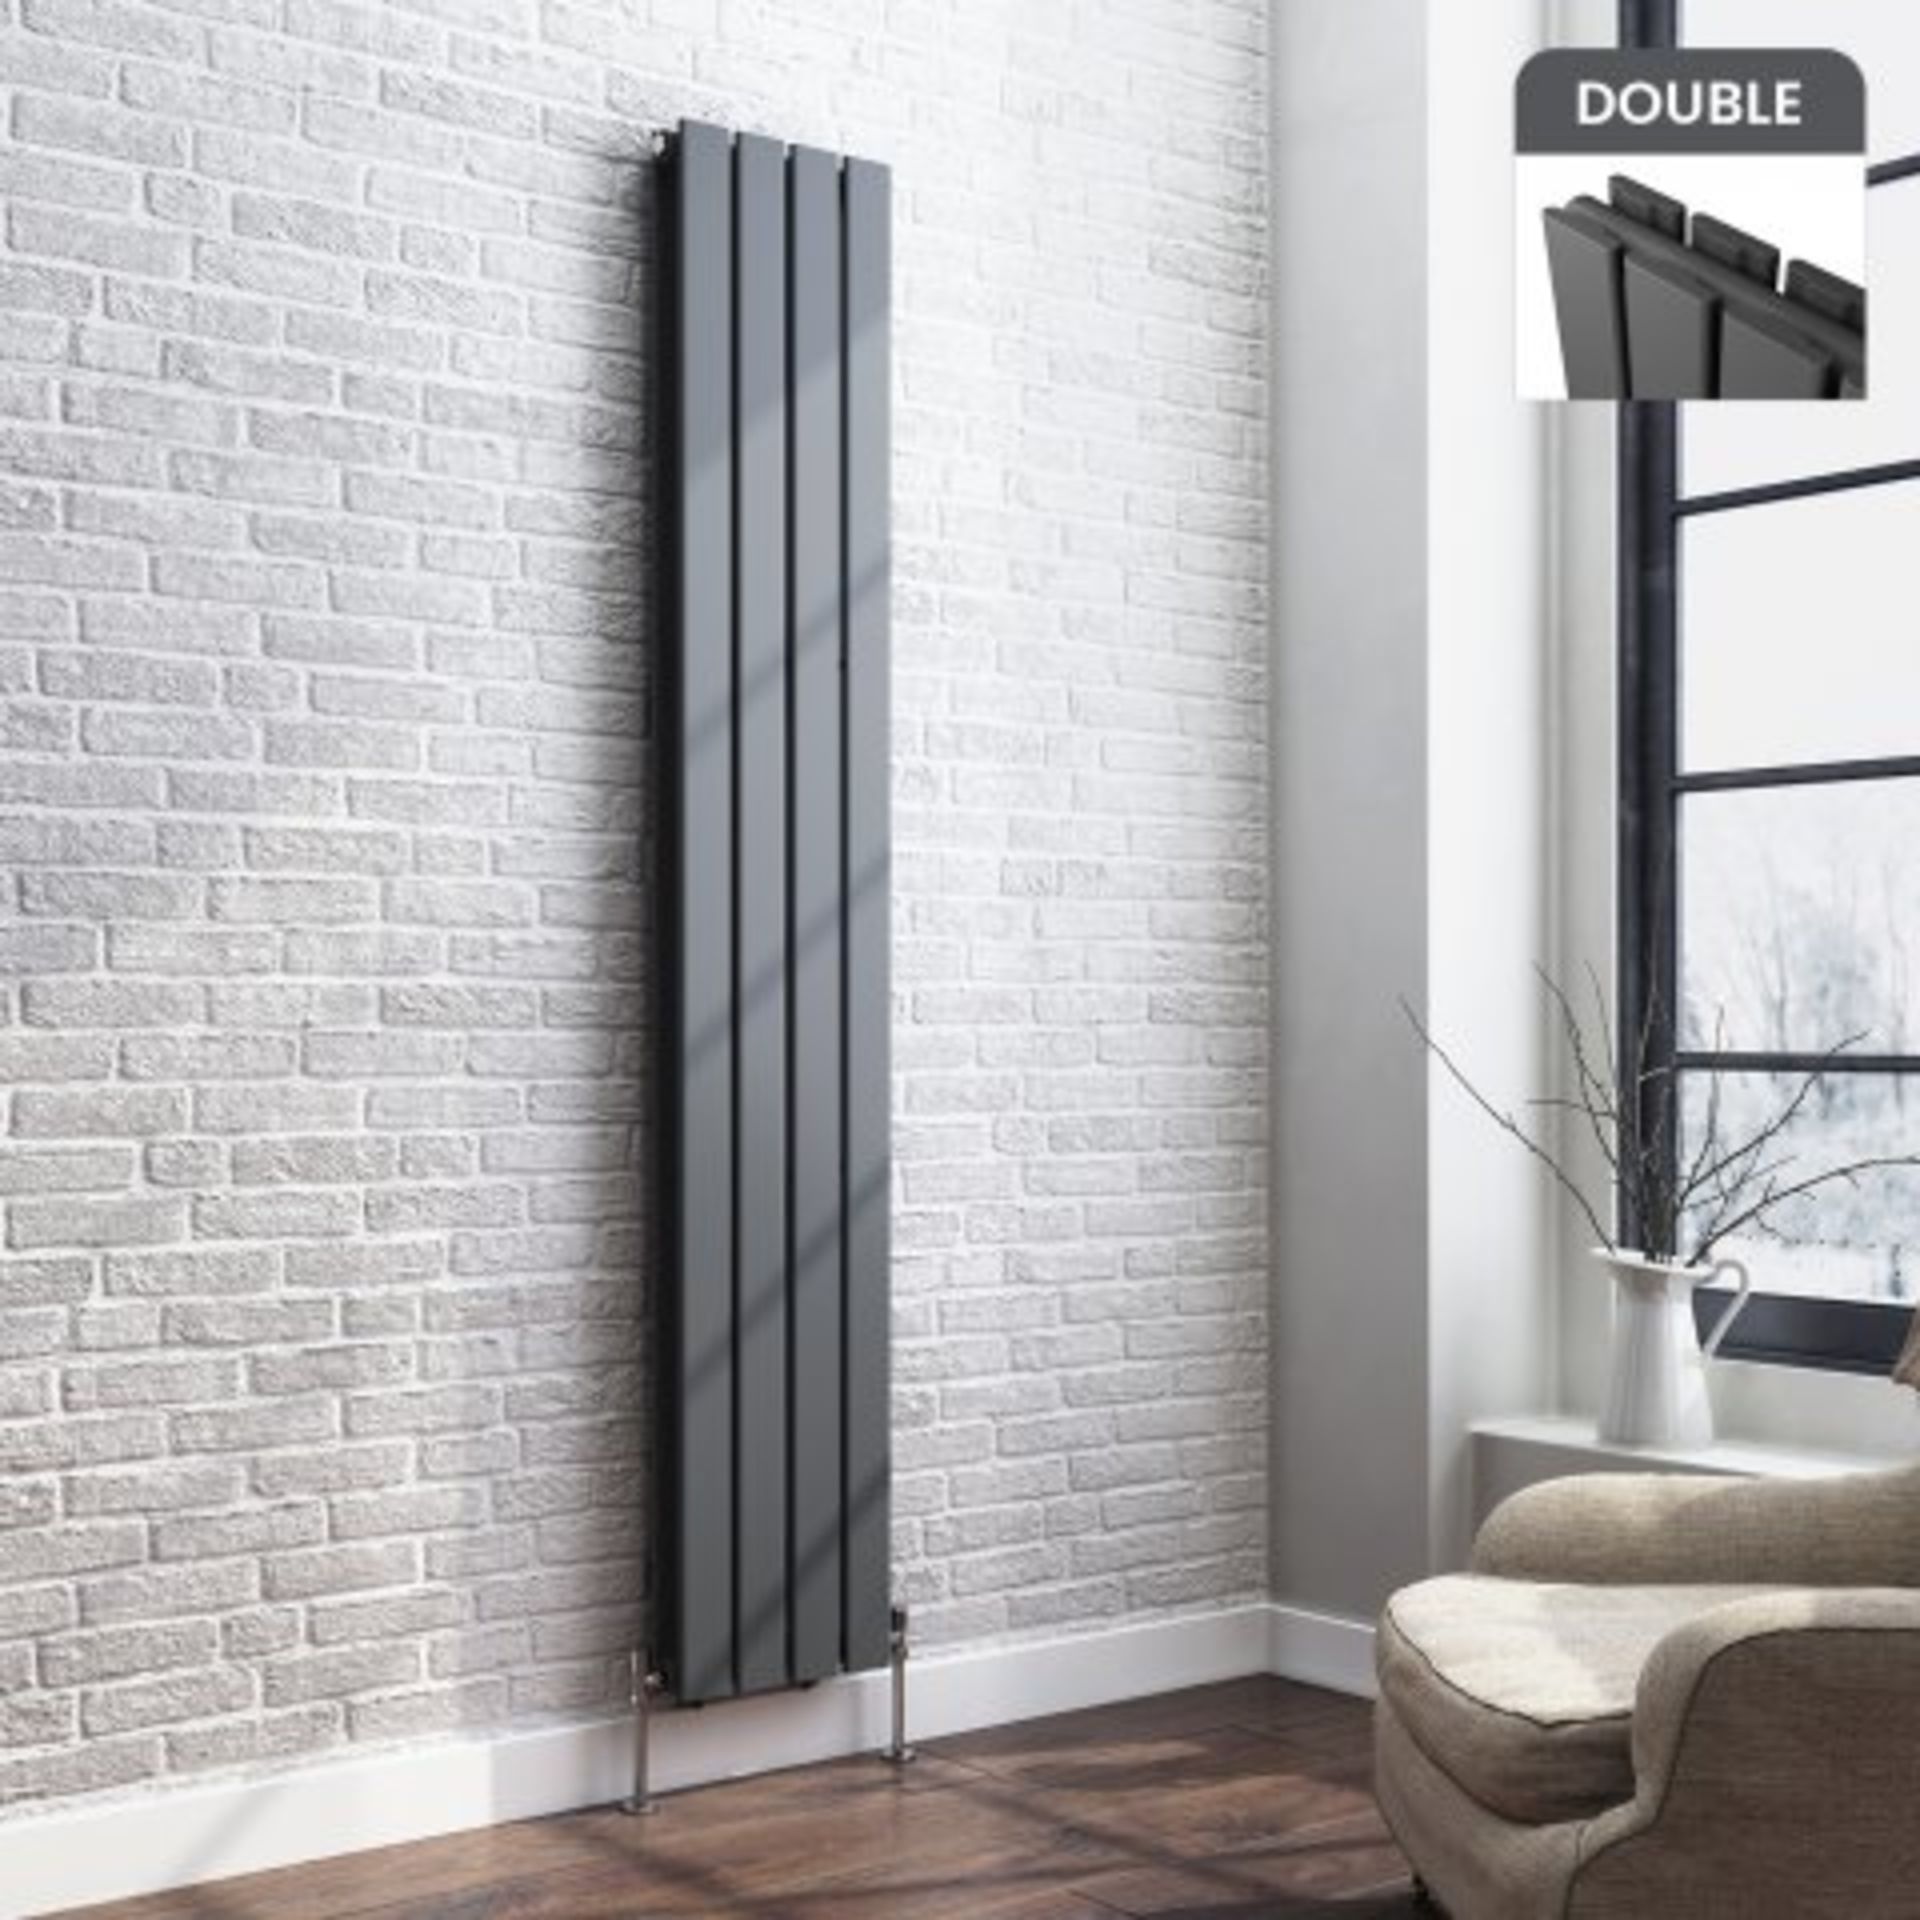 (REF4) 1800x300mm Anthracite Double Flat Panel Vertical Radiator - Thera Range. RRP £399.99. Our